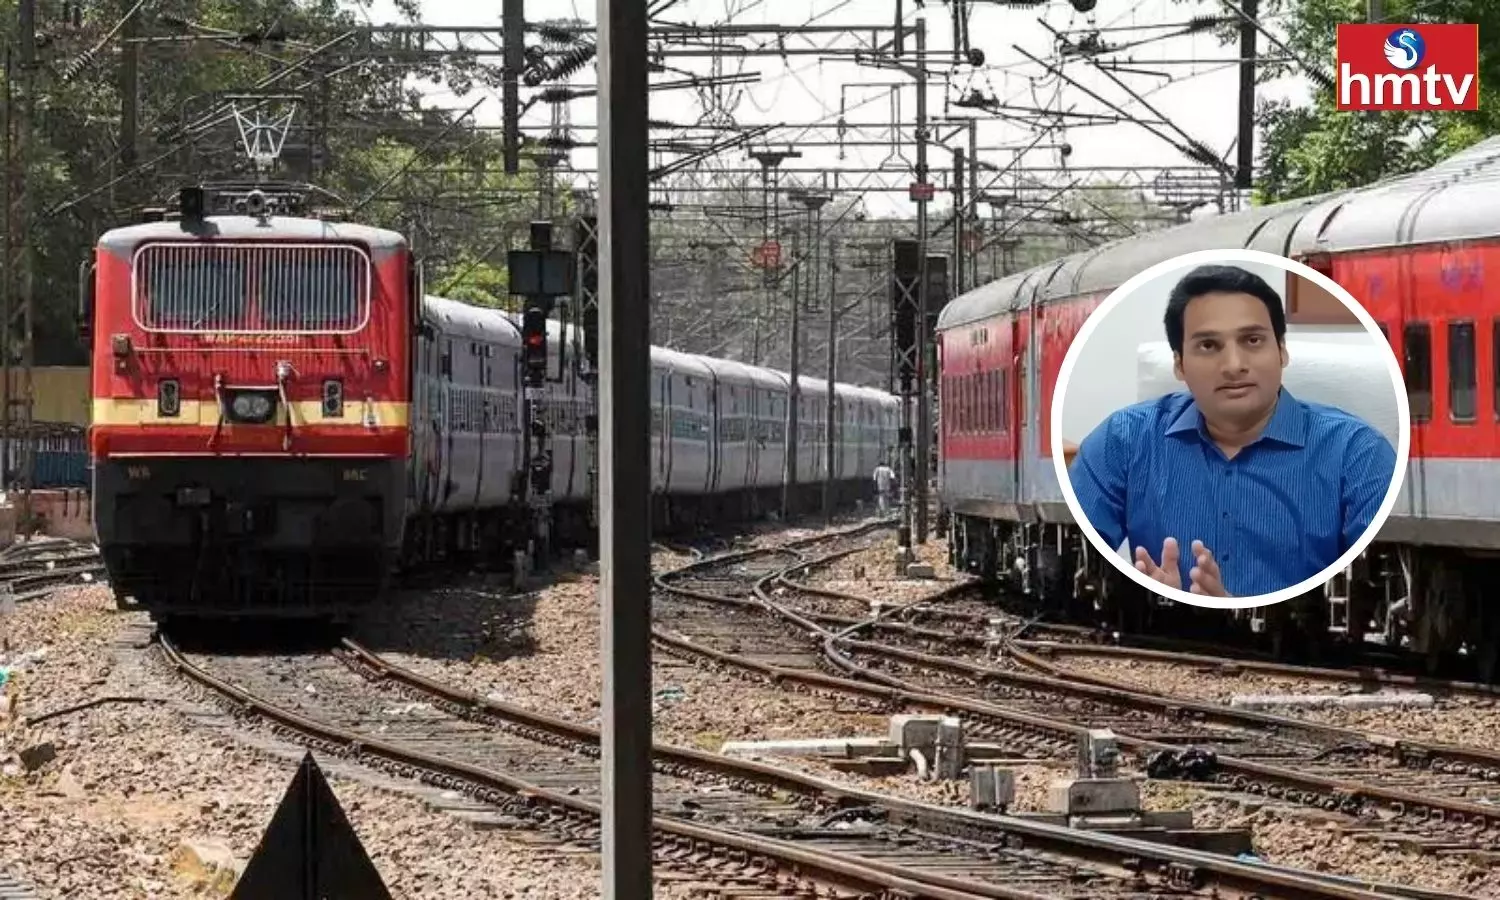 CPRO Rakesh Said That 115 Special Trains Have Been Prepared On The Occasion Of The Sankranti Festival.